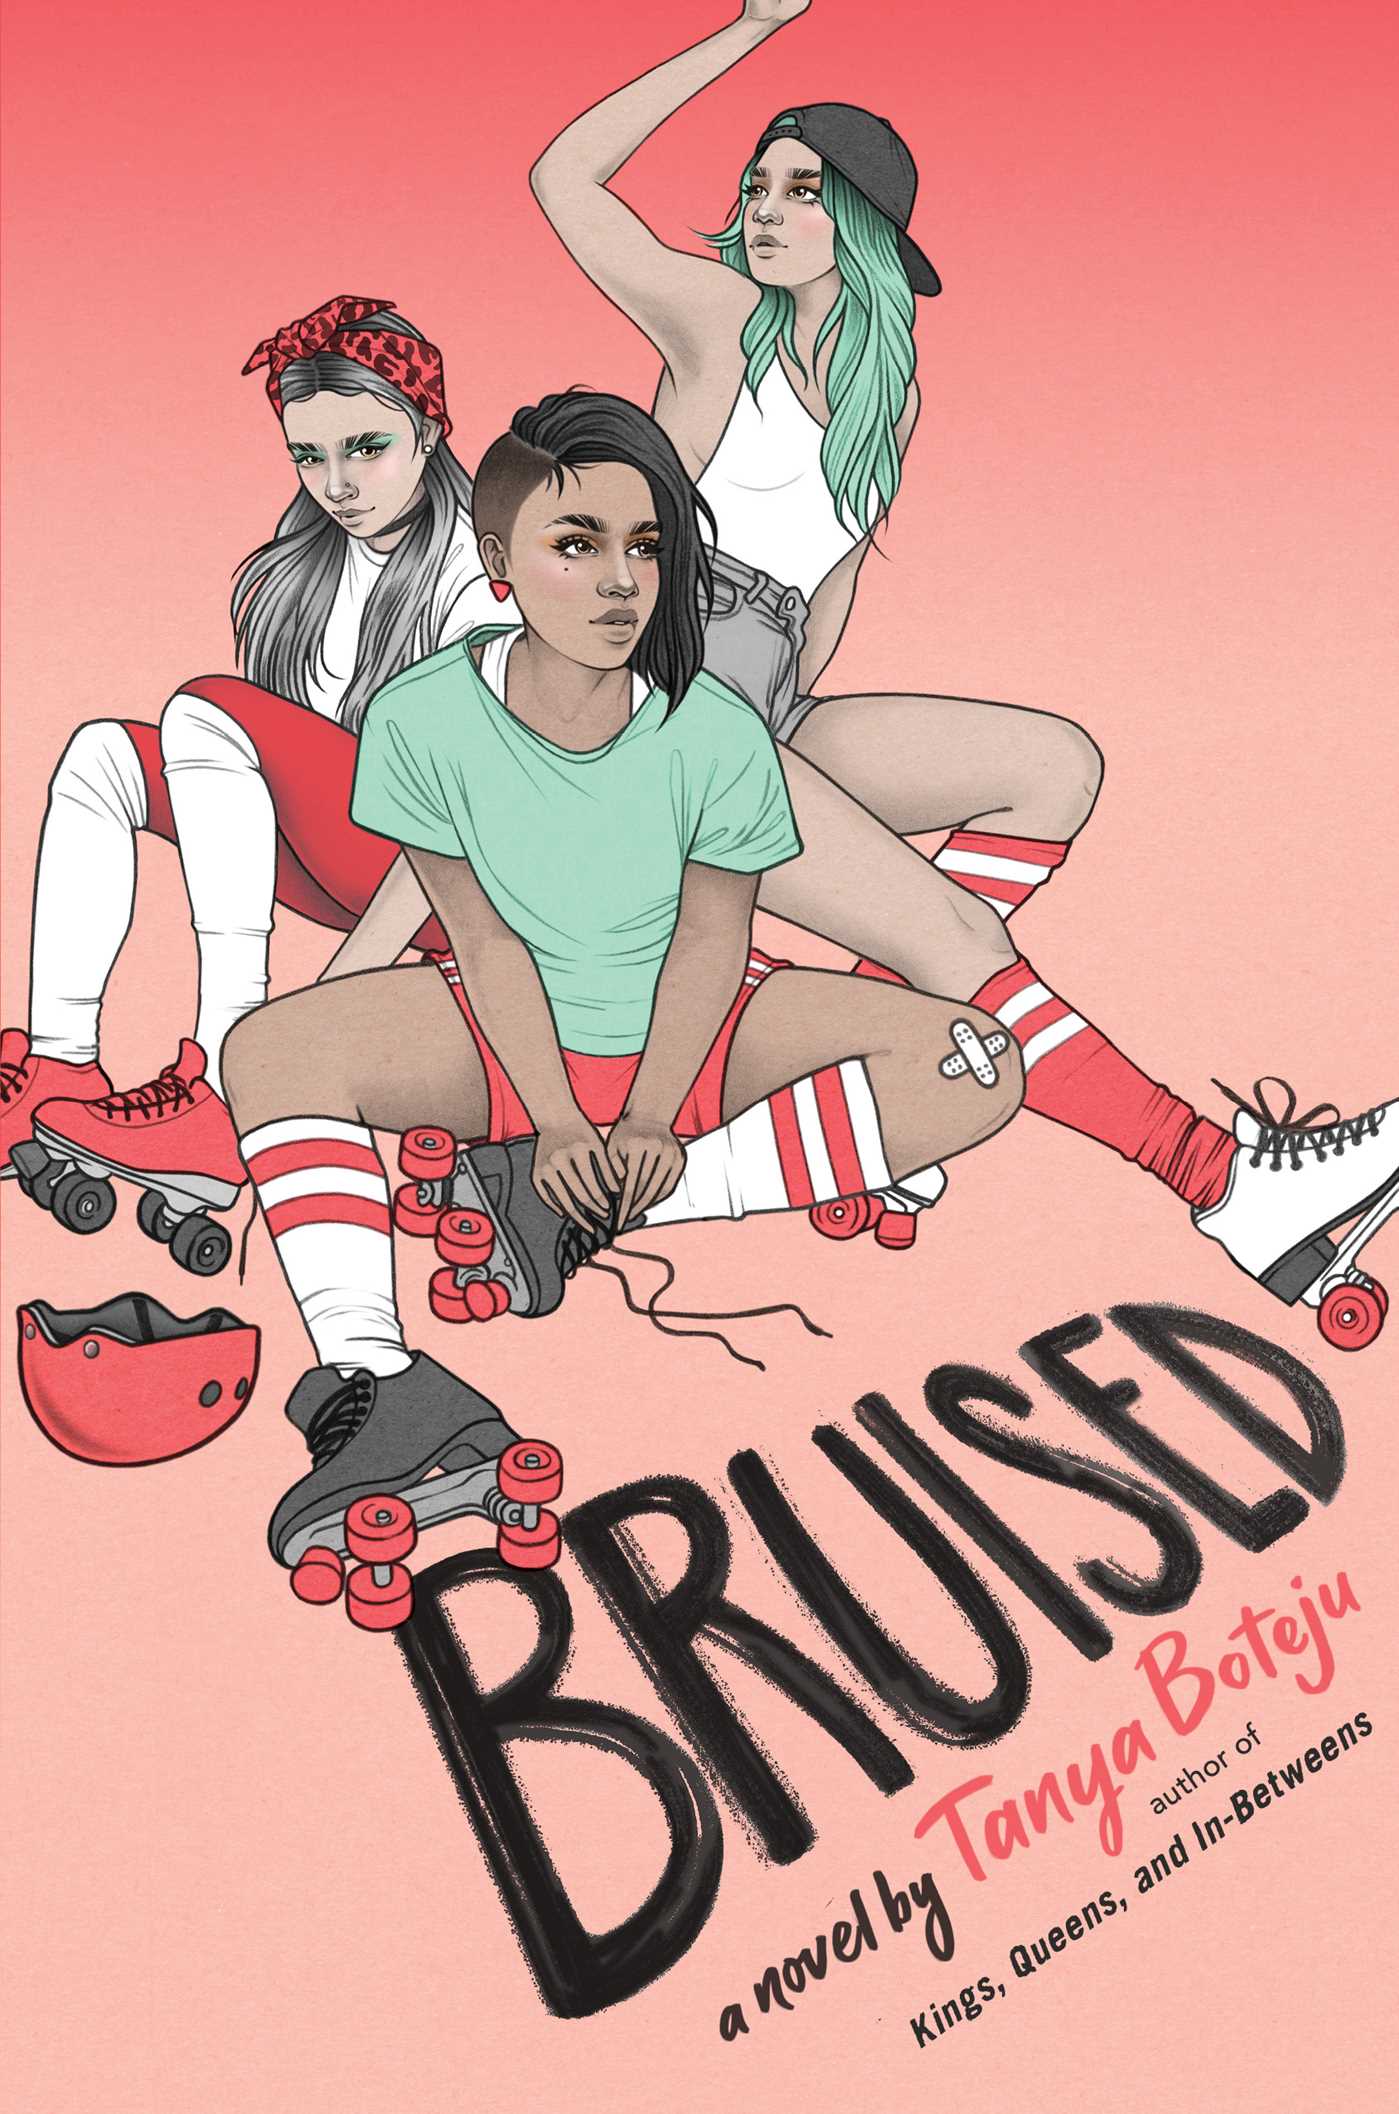 Cover of "Bruised"